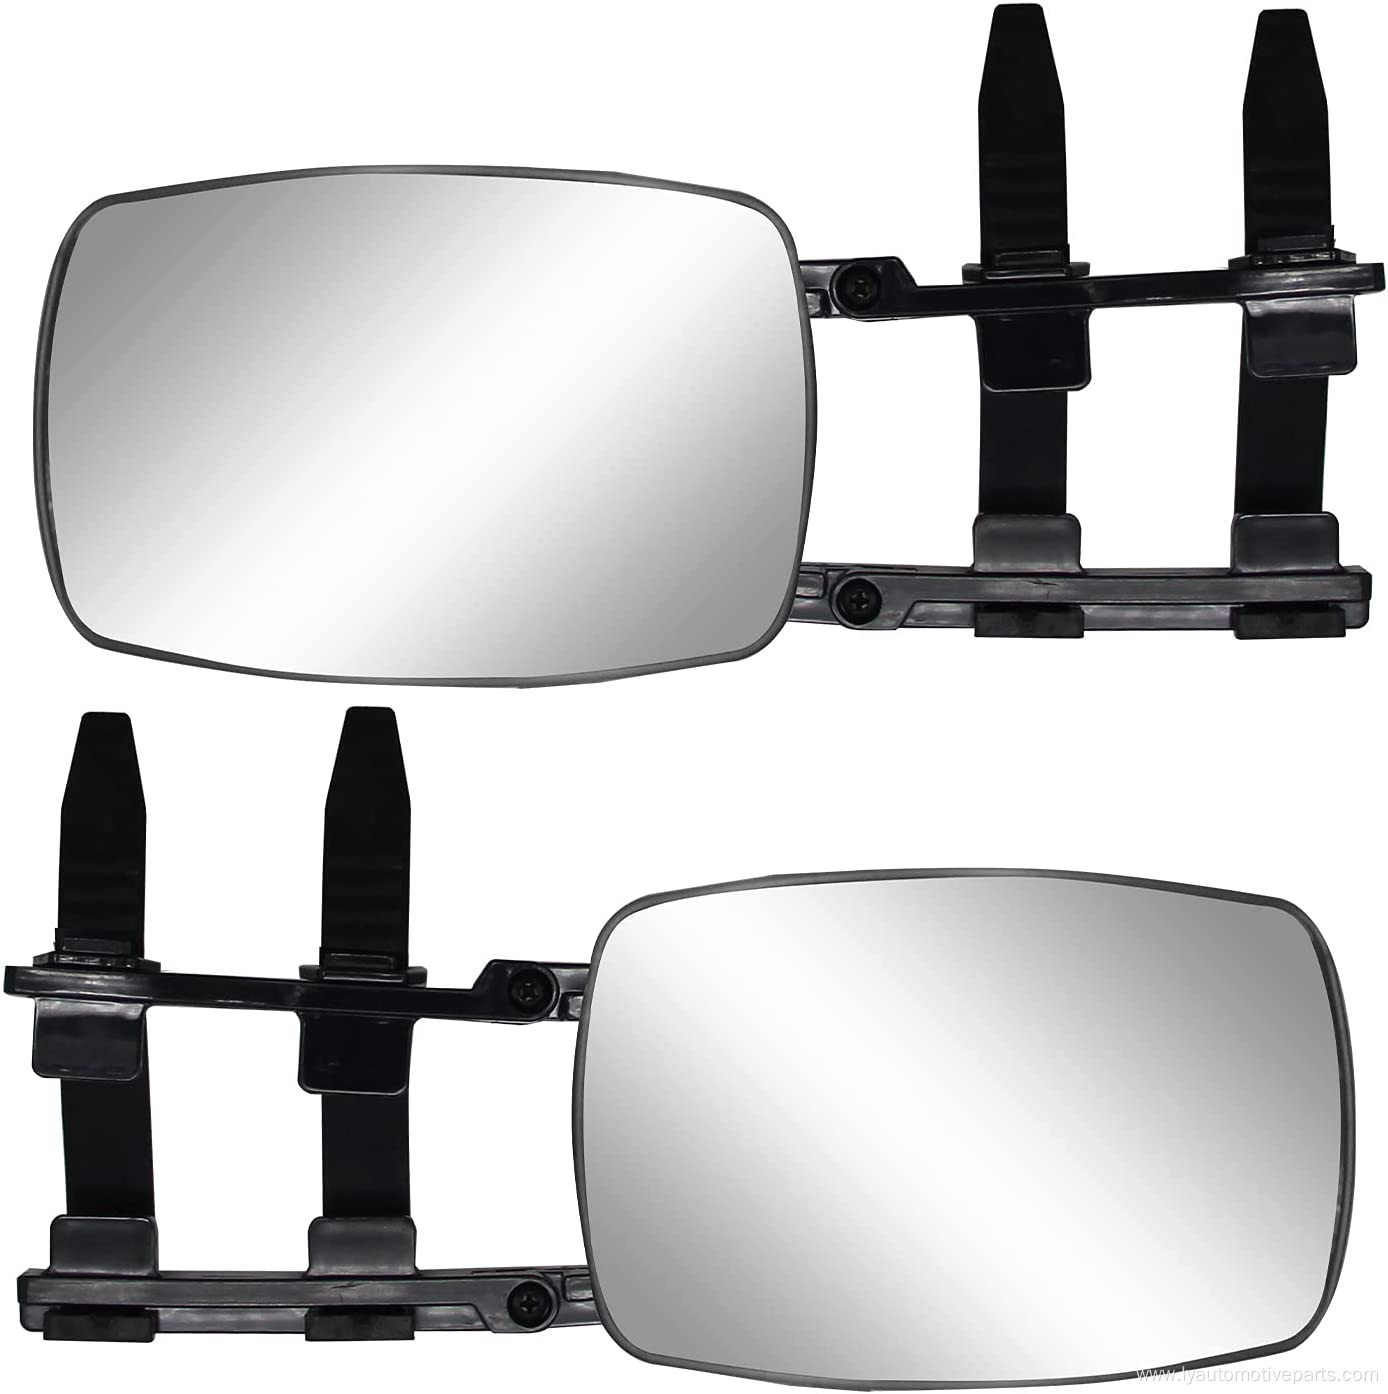 Extended vision car trailer mirror